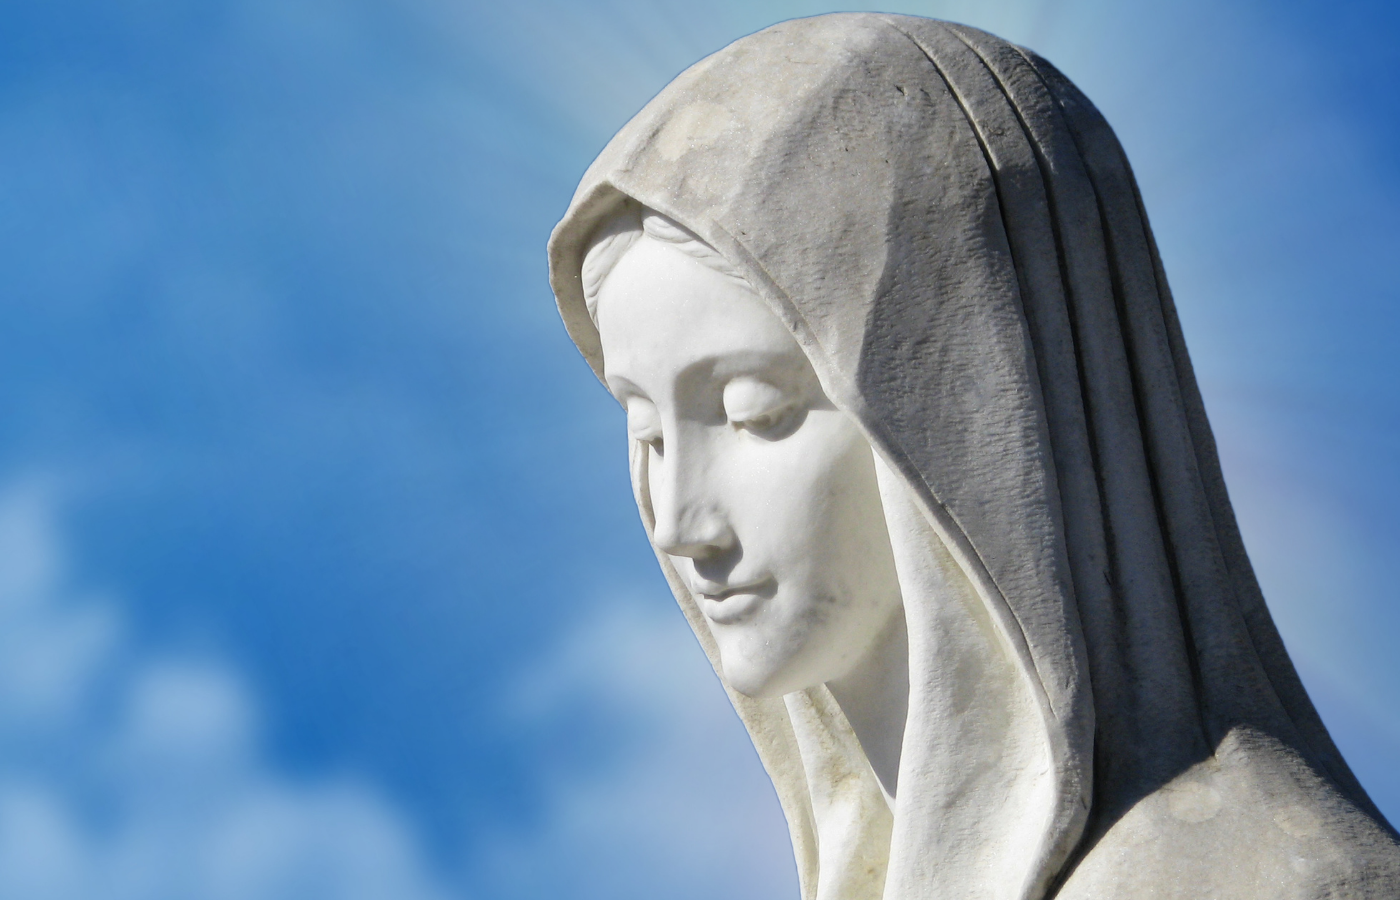 The 40th anniversary of Our Lady's apparitions in Medjugorje.